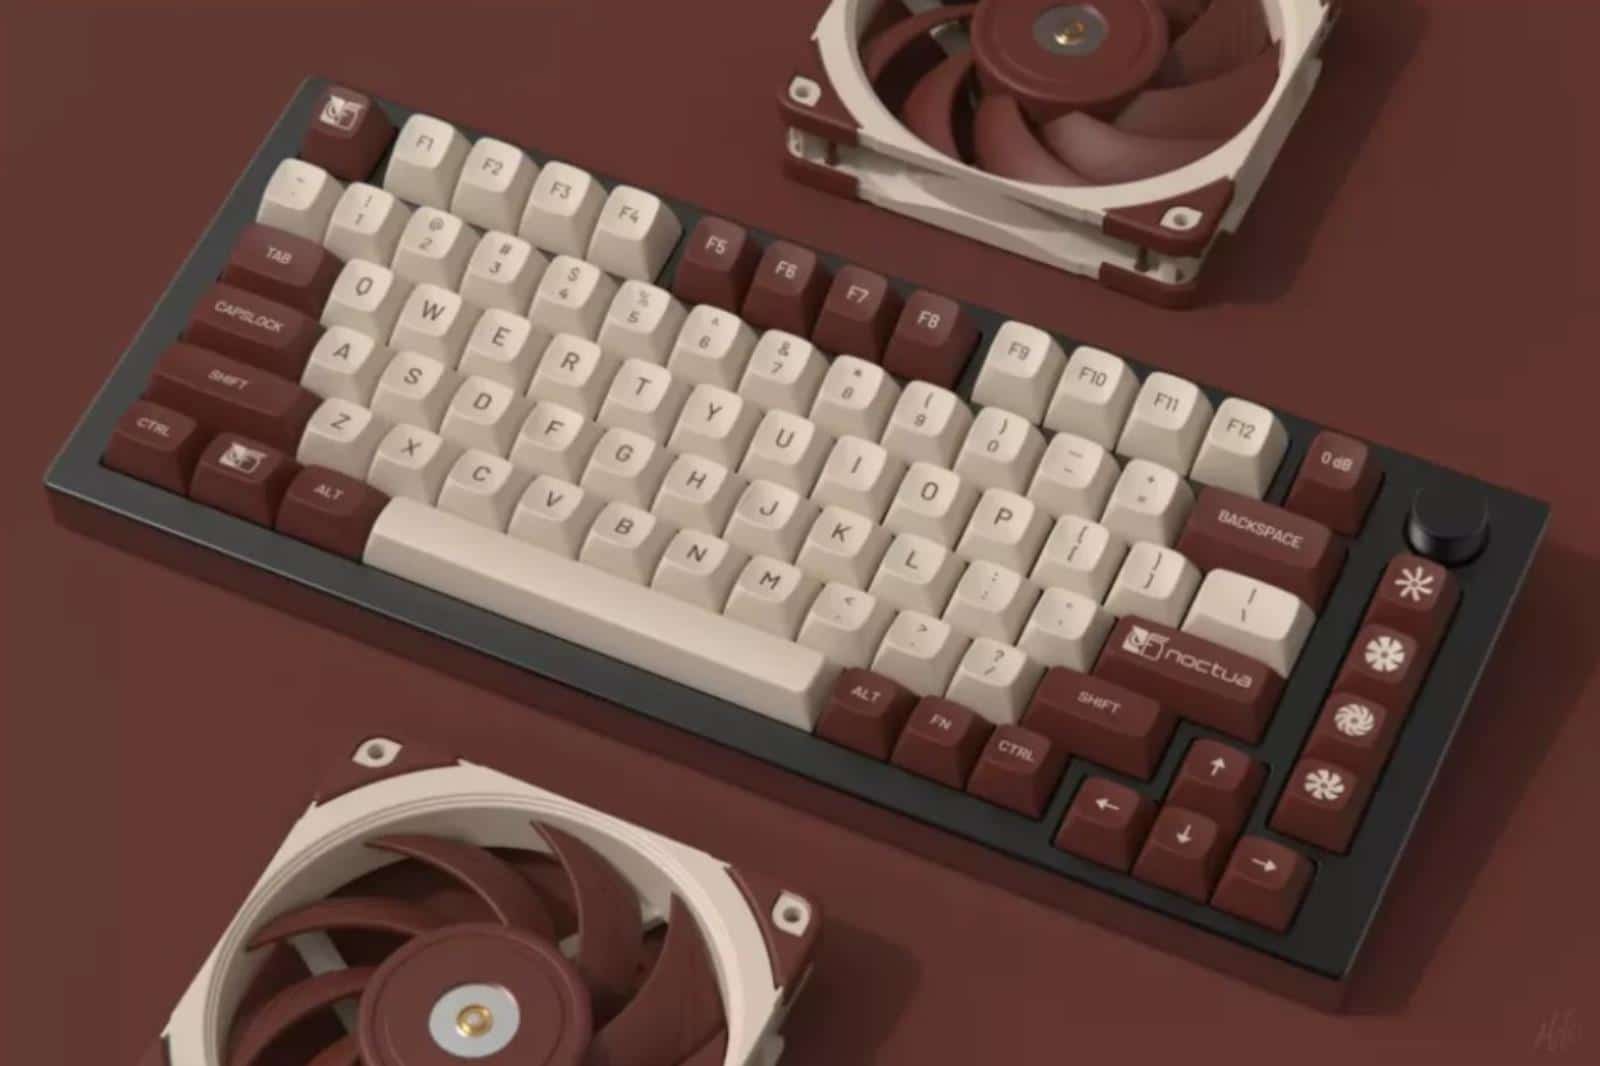 Do you love the colors of Noctua?  Bring them to your Noctua keycap countertops